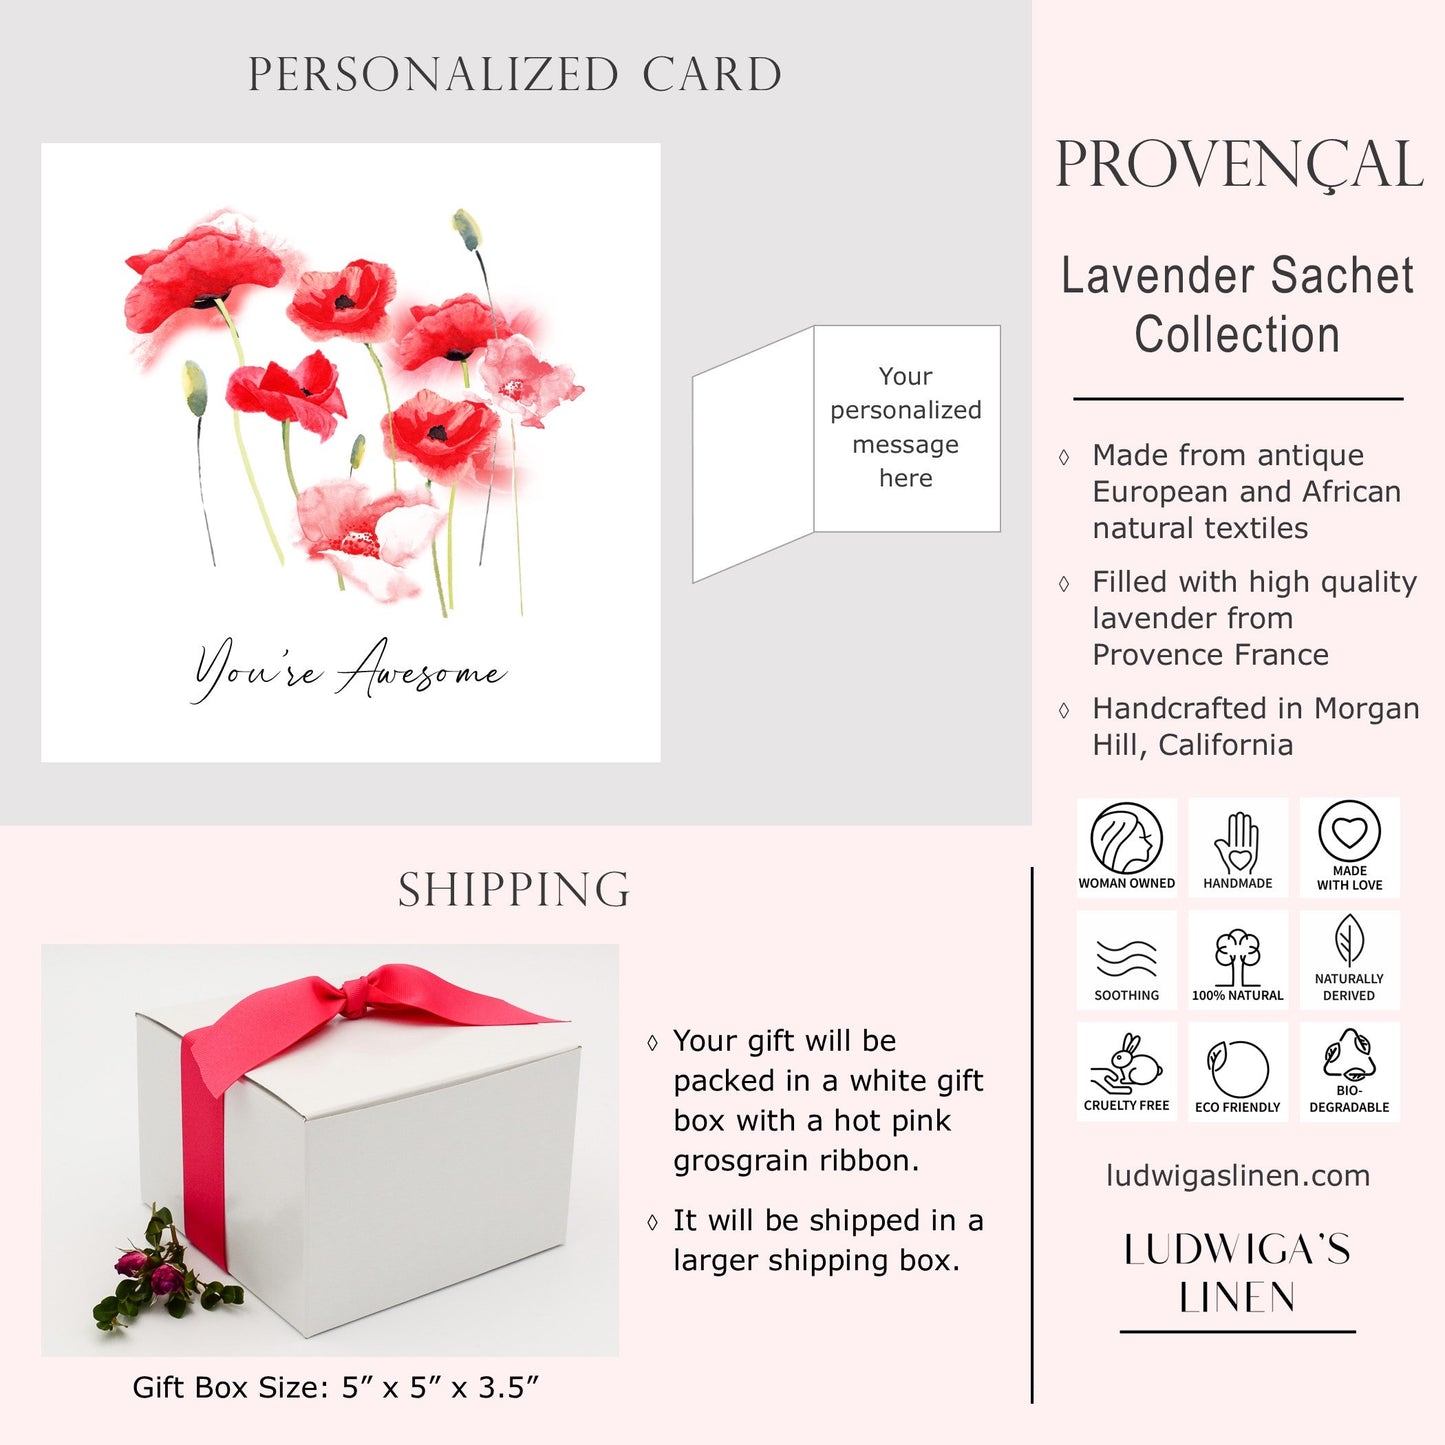 Gift box with hot pink gros grain ribbon, personalized card, shipping and general information about Ludwiga's Linen Provençal sachet collection and shipping information